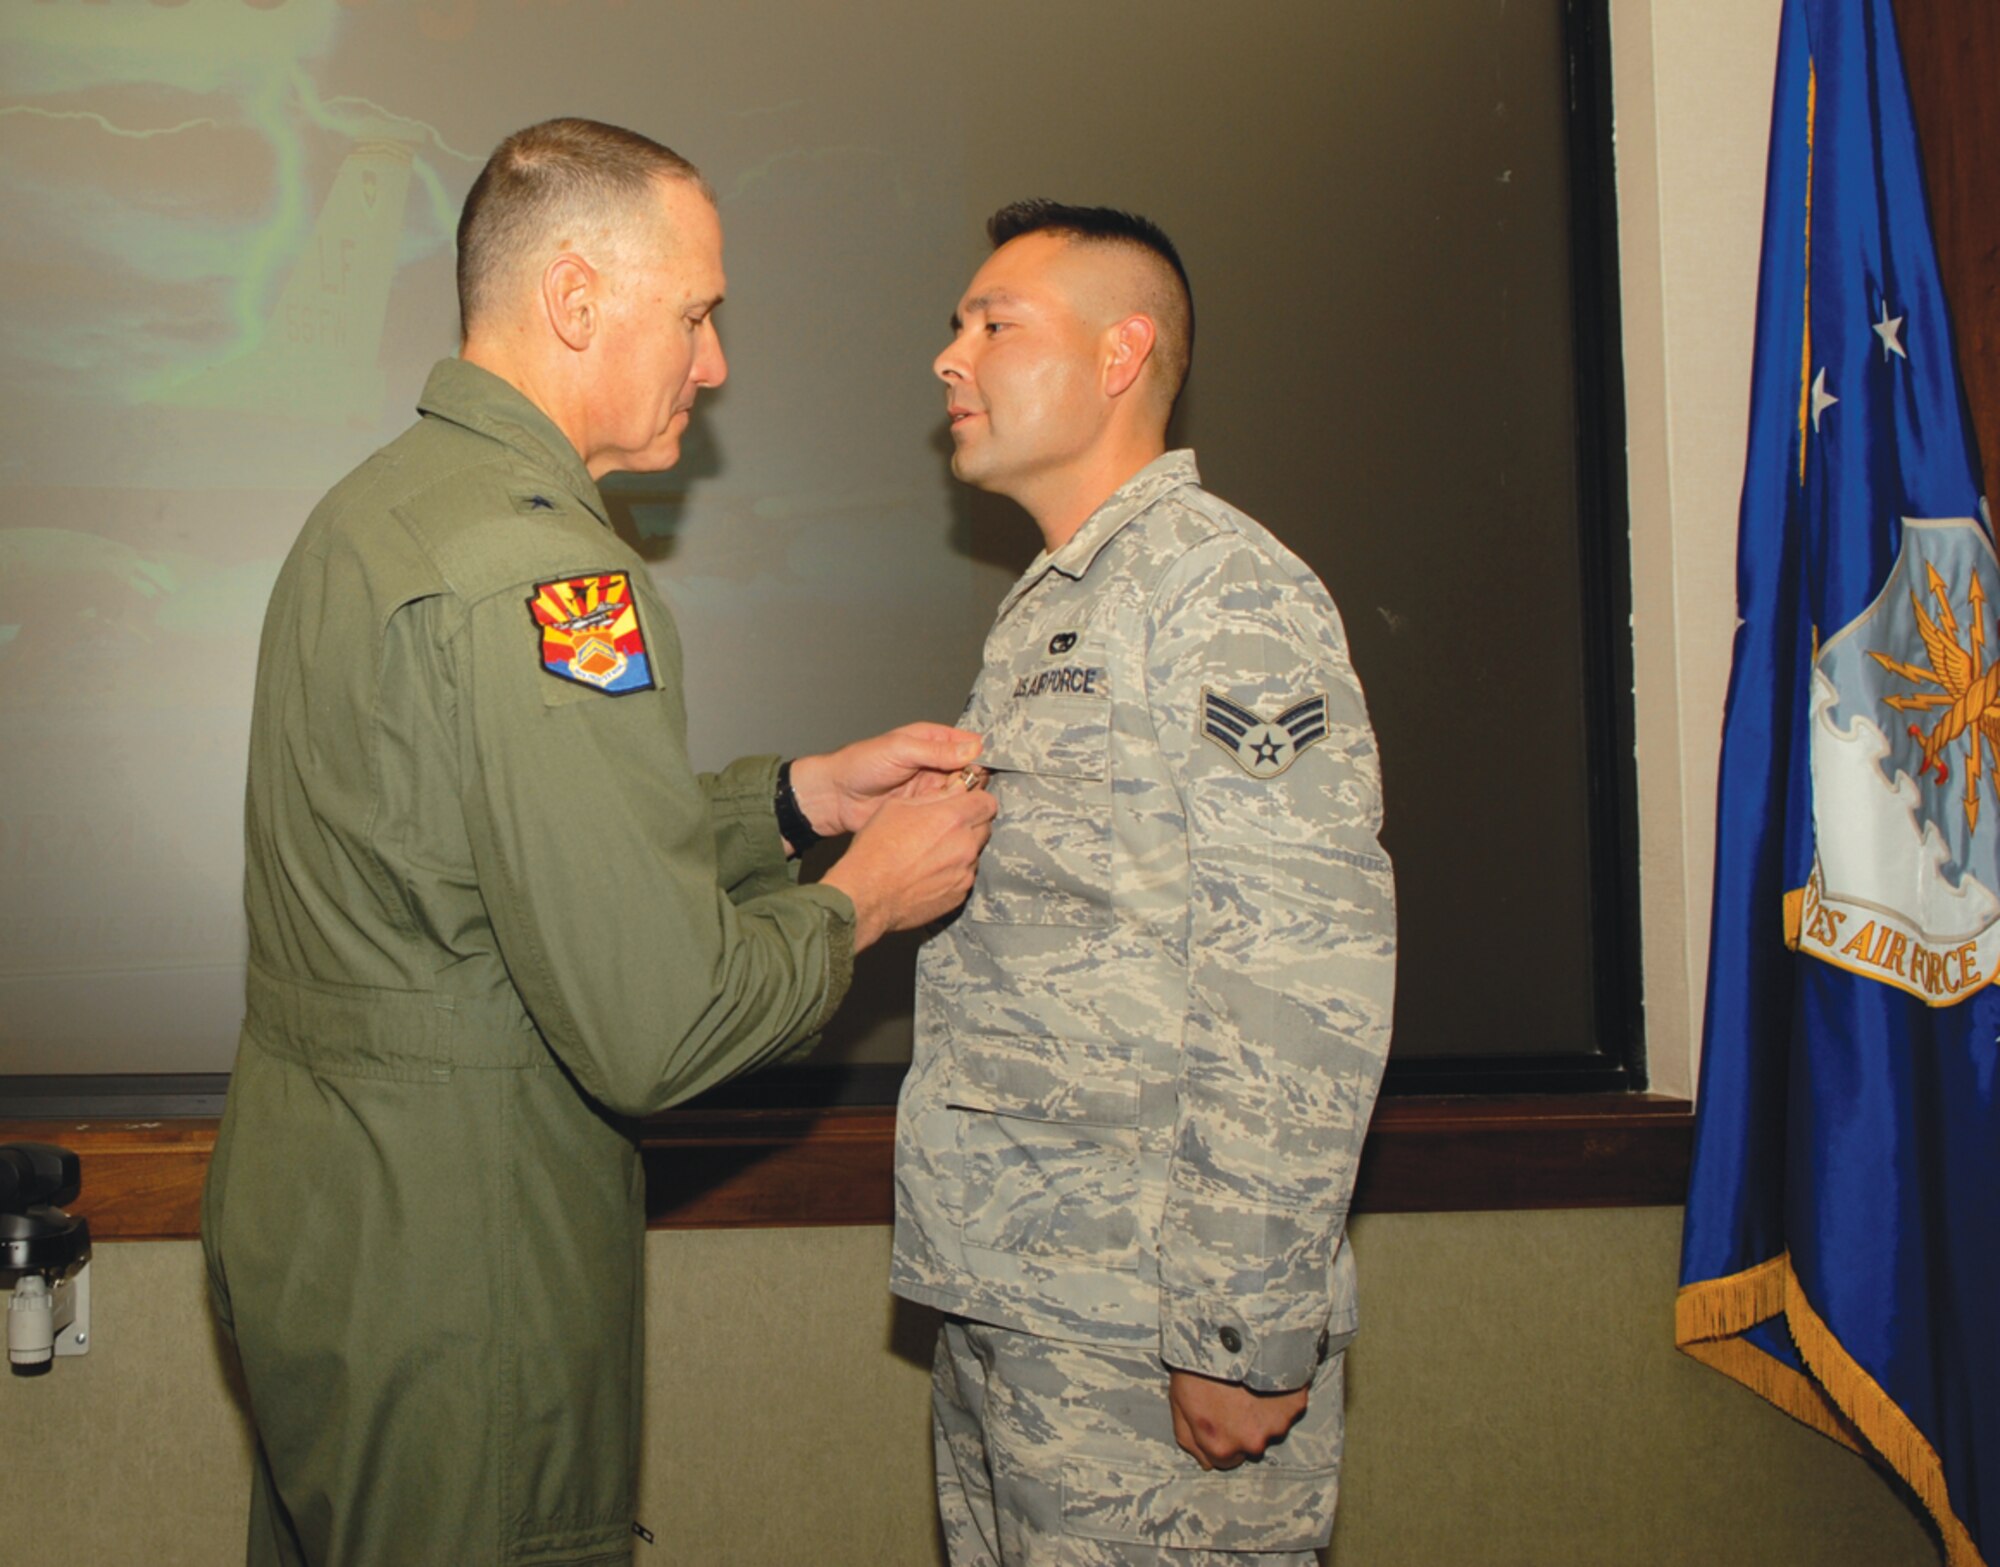 Brig. Gen. Kurt Neubauer, 56th Fighter Wing commander, awards Senior Airman Johnny Martinez, 56th Logistics Readiness Squadron, the Bronze Star for his actions during his first deployment to Afghanistan from August 2008 to August 2009. (U.S. Air Force photo by Airman 1st Class Ronifel Yasay)